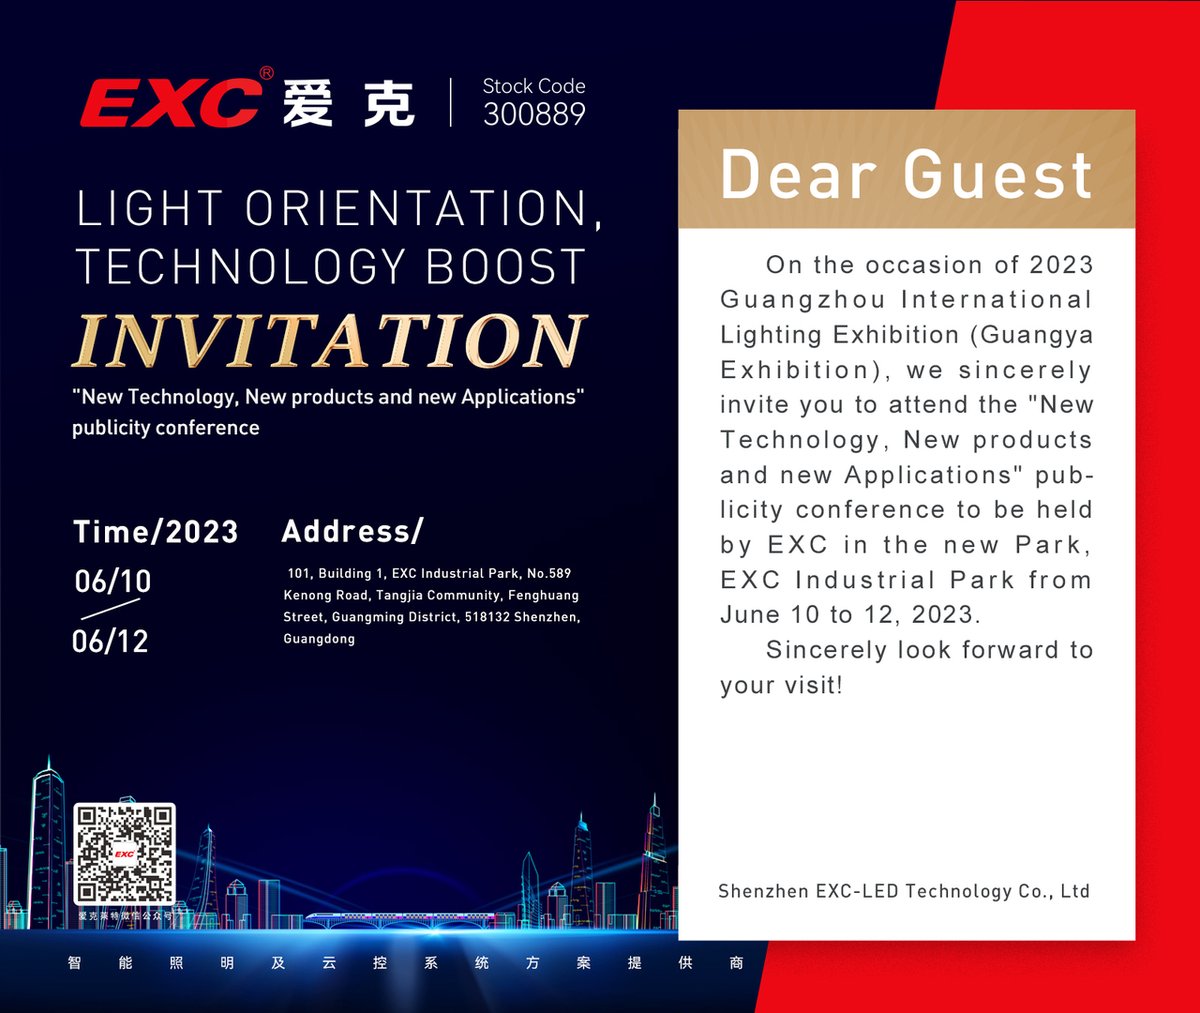 Invitation to EXC's 'New Technology, New Products, New Applications' Seminar

#facadelighting #outdoorlighting #lightingprojects #lightingsolutions